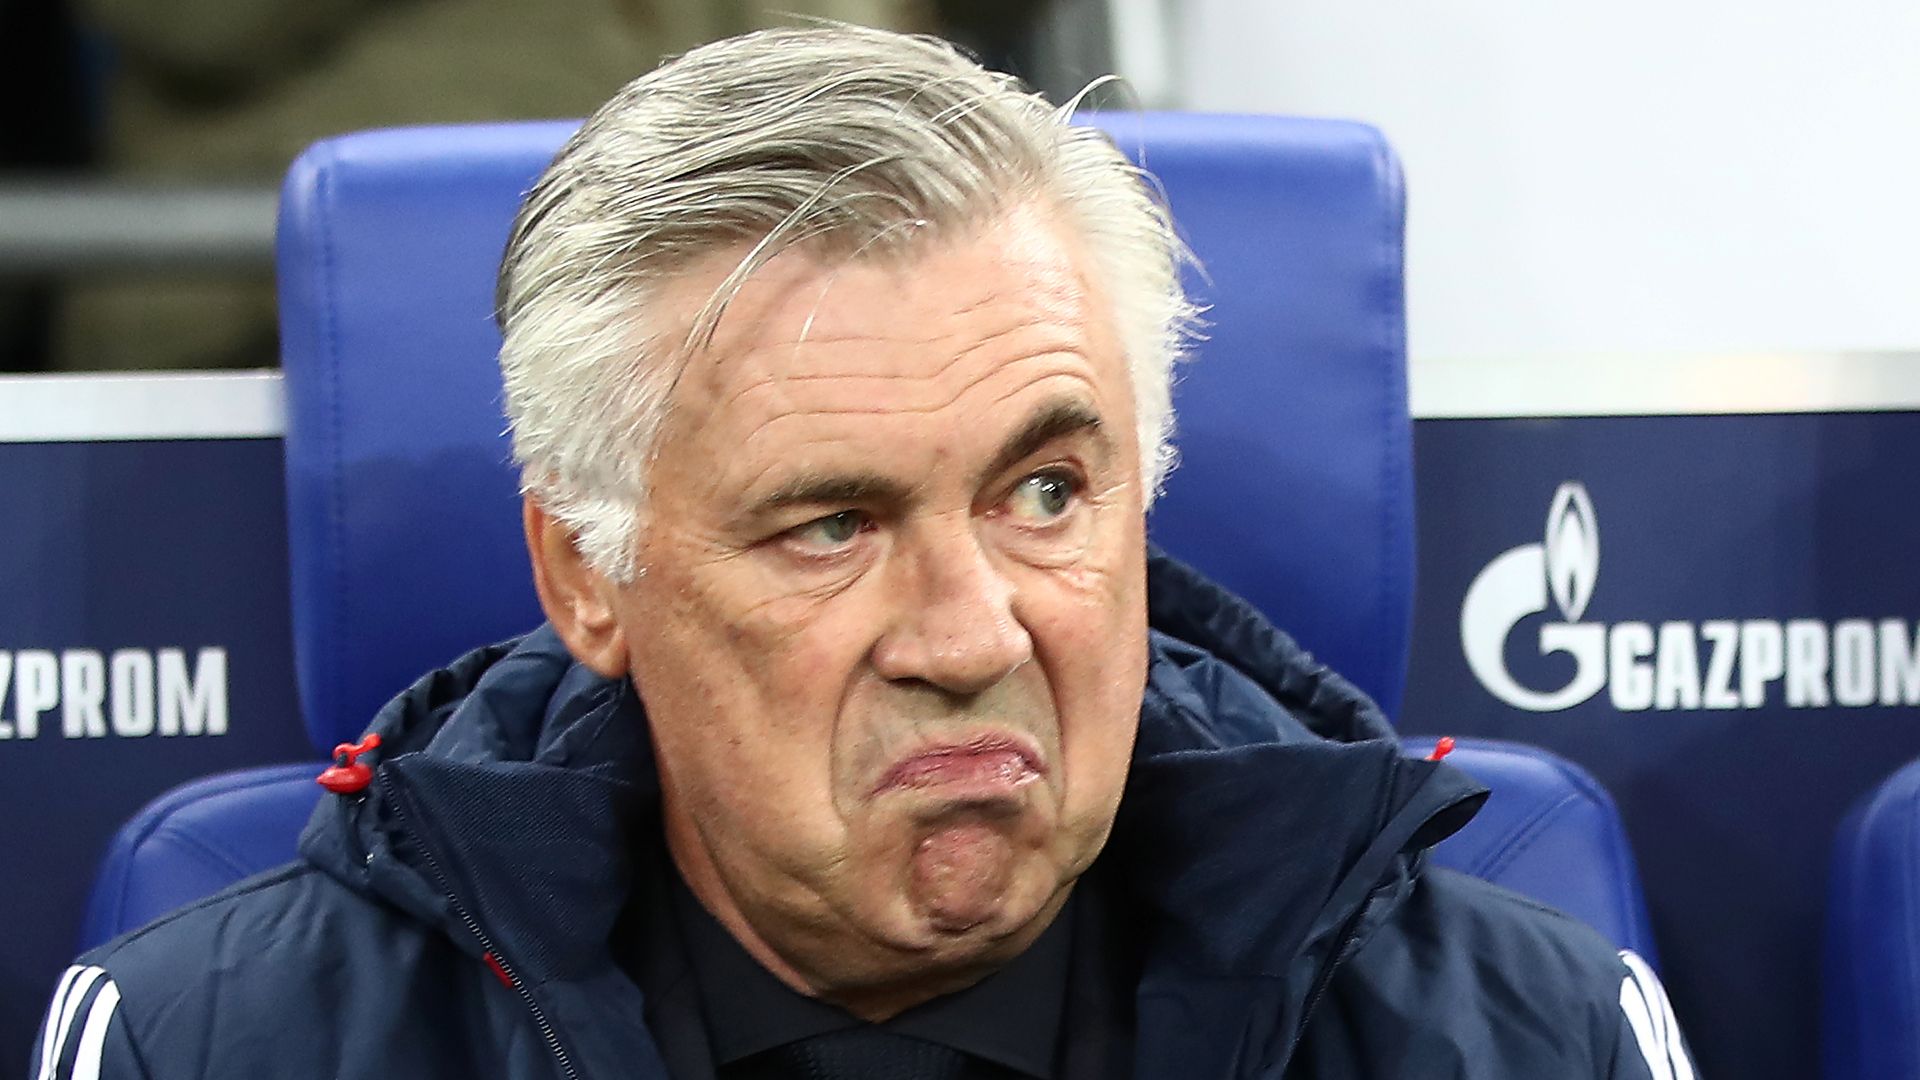 Real Madrid has identified Carlo Ancelotti's replacement if he takes up the Brazil job